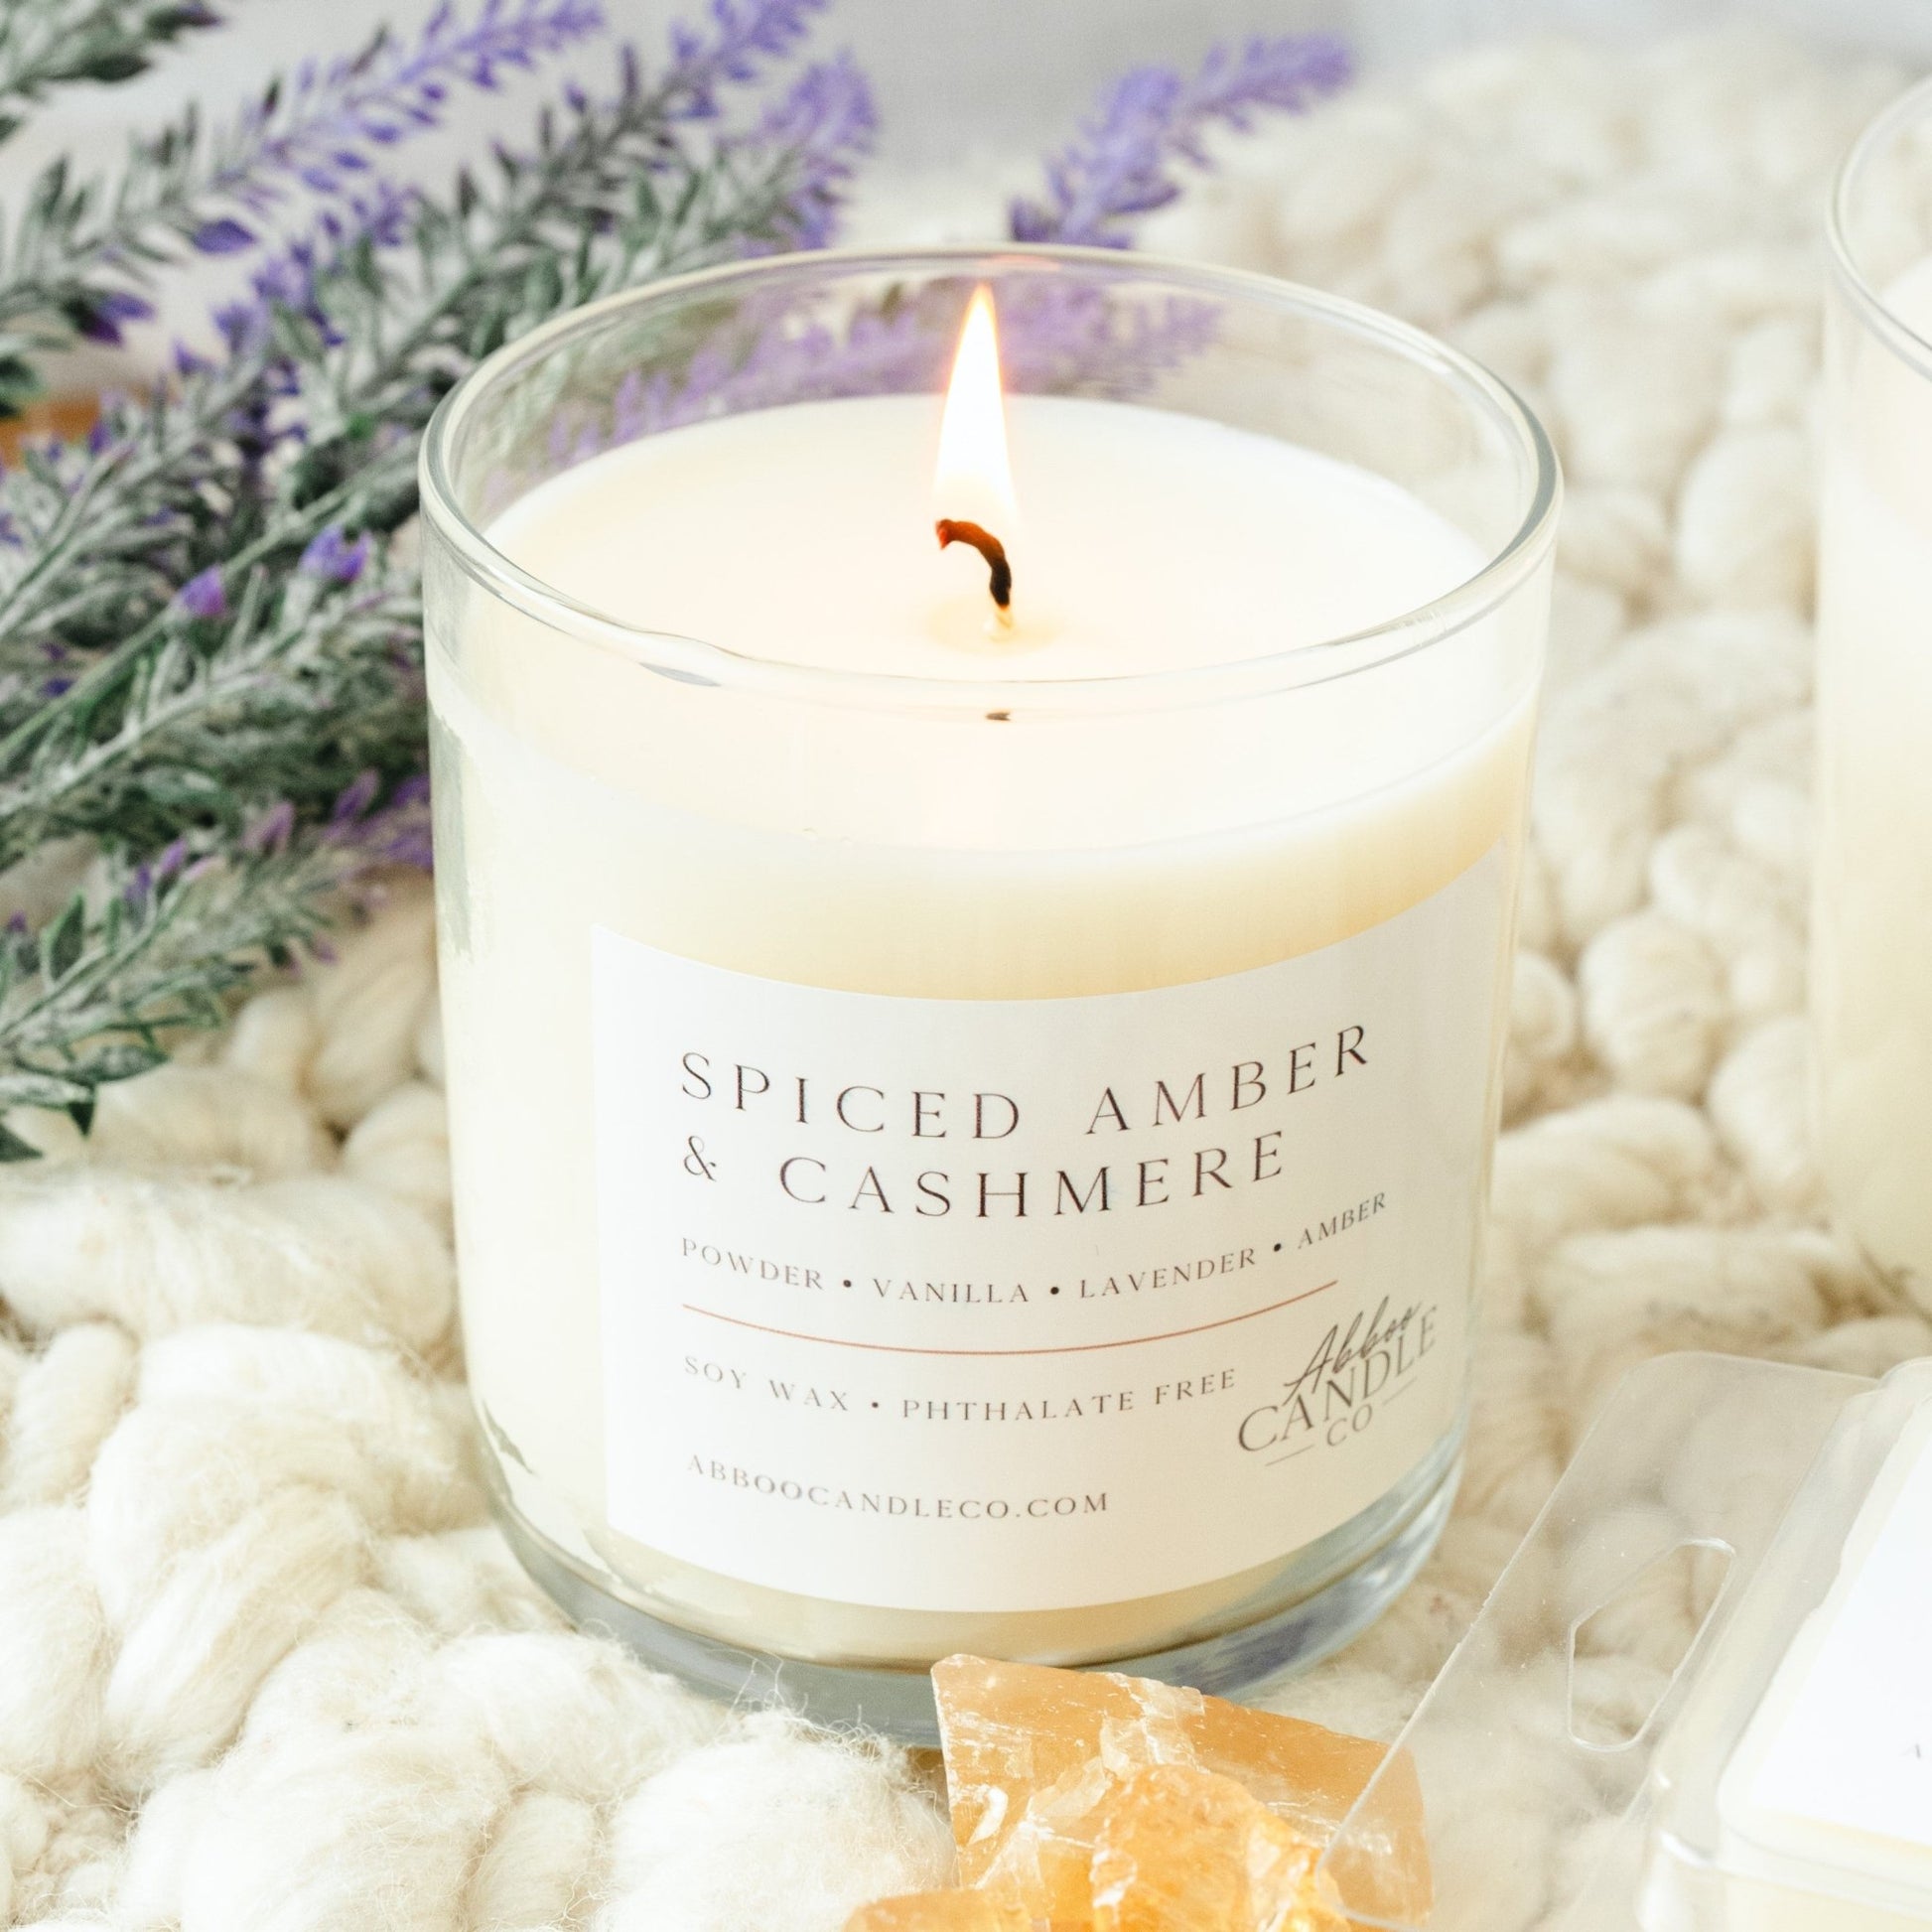 Spiced Amber and Cashmere Tumbler Soy Candle - Abboo Candle Co